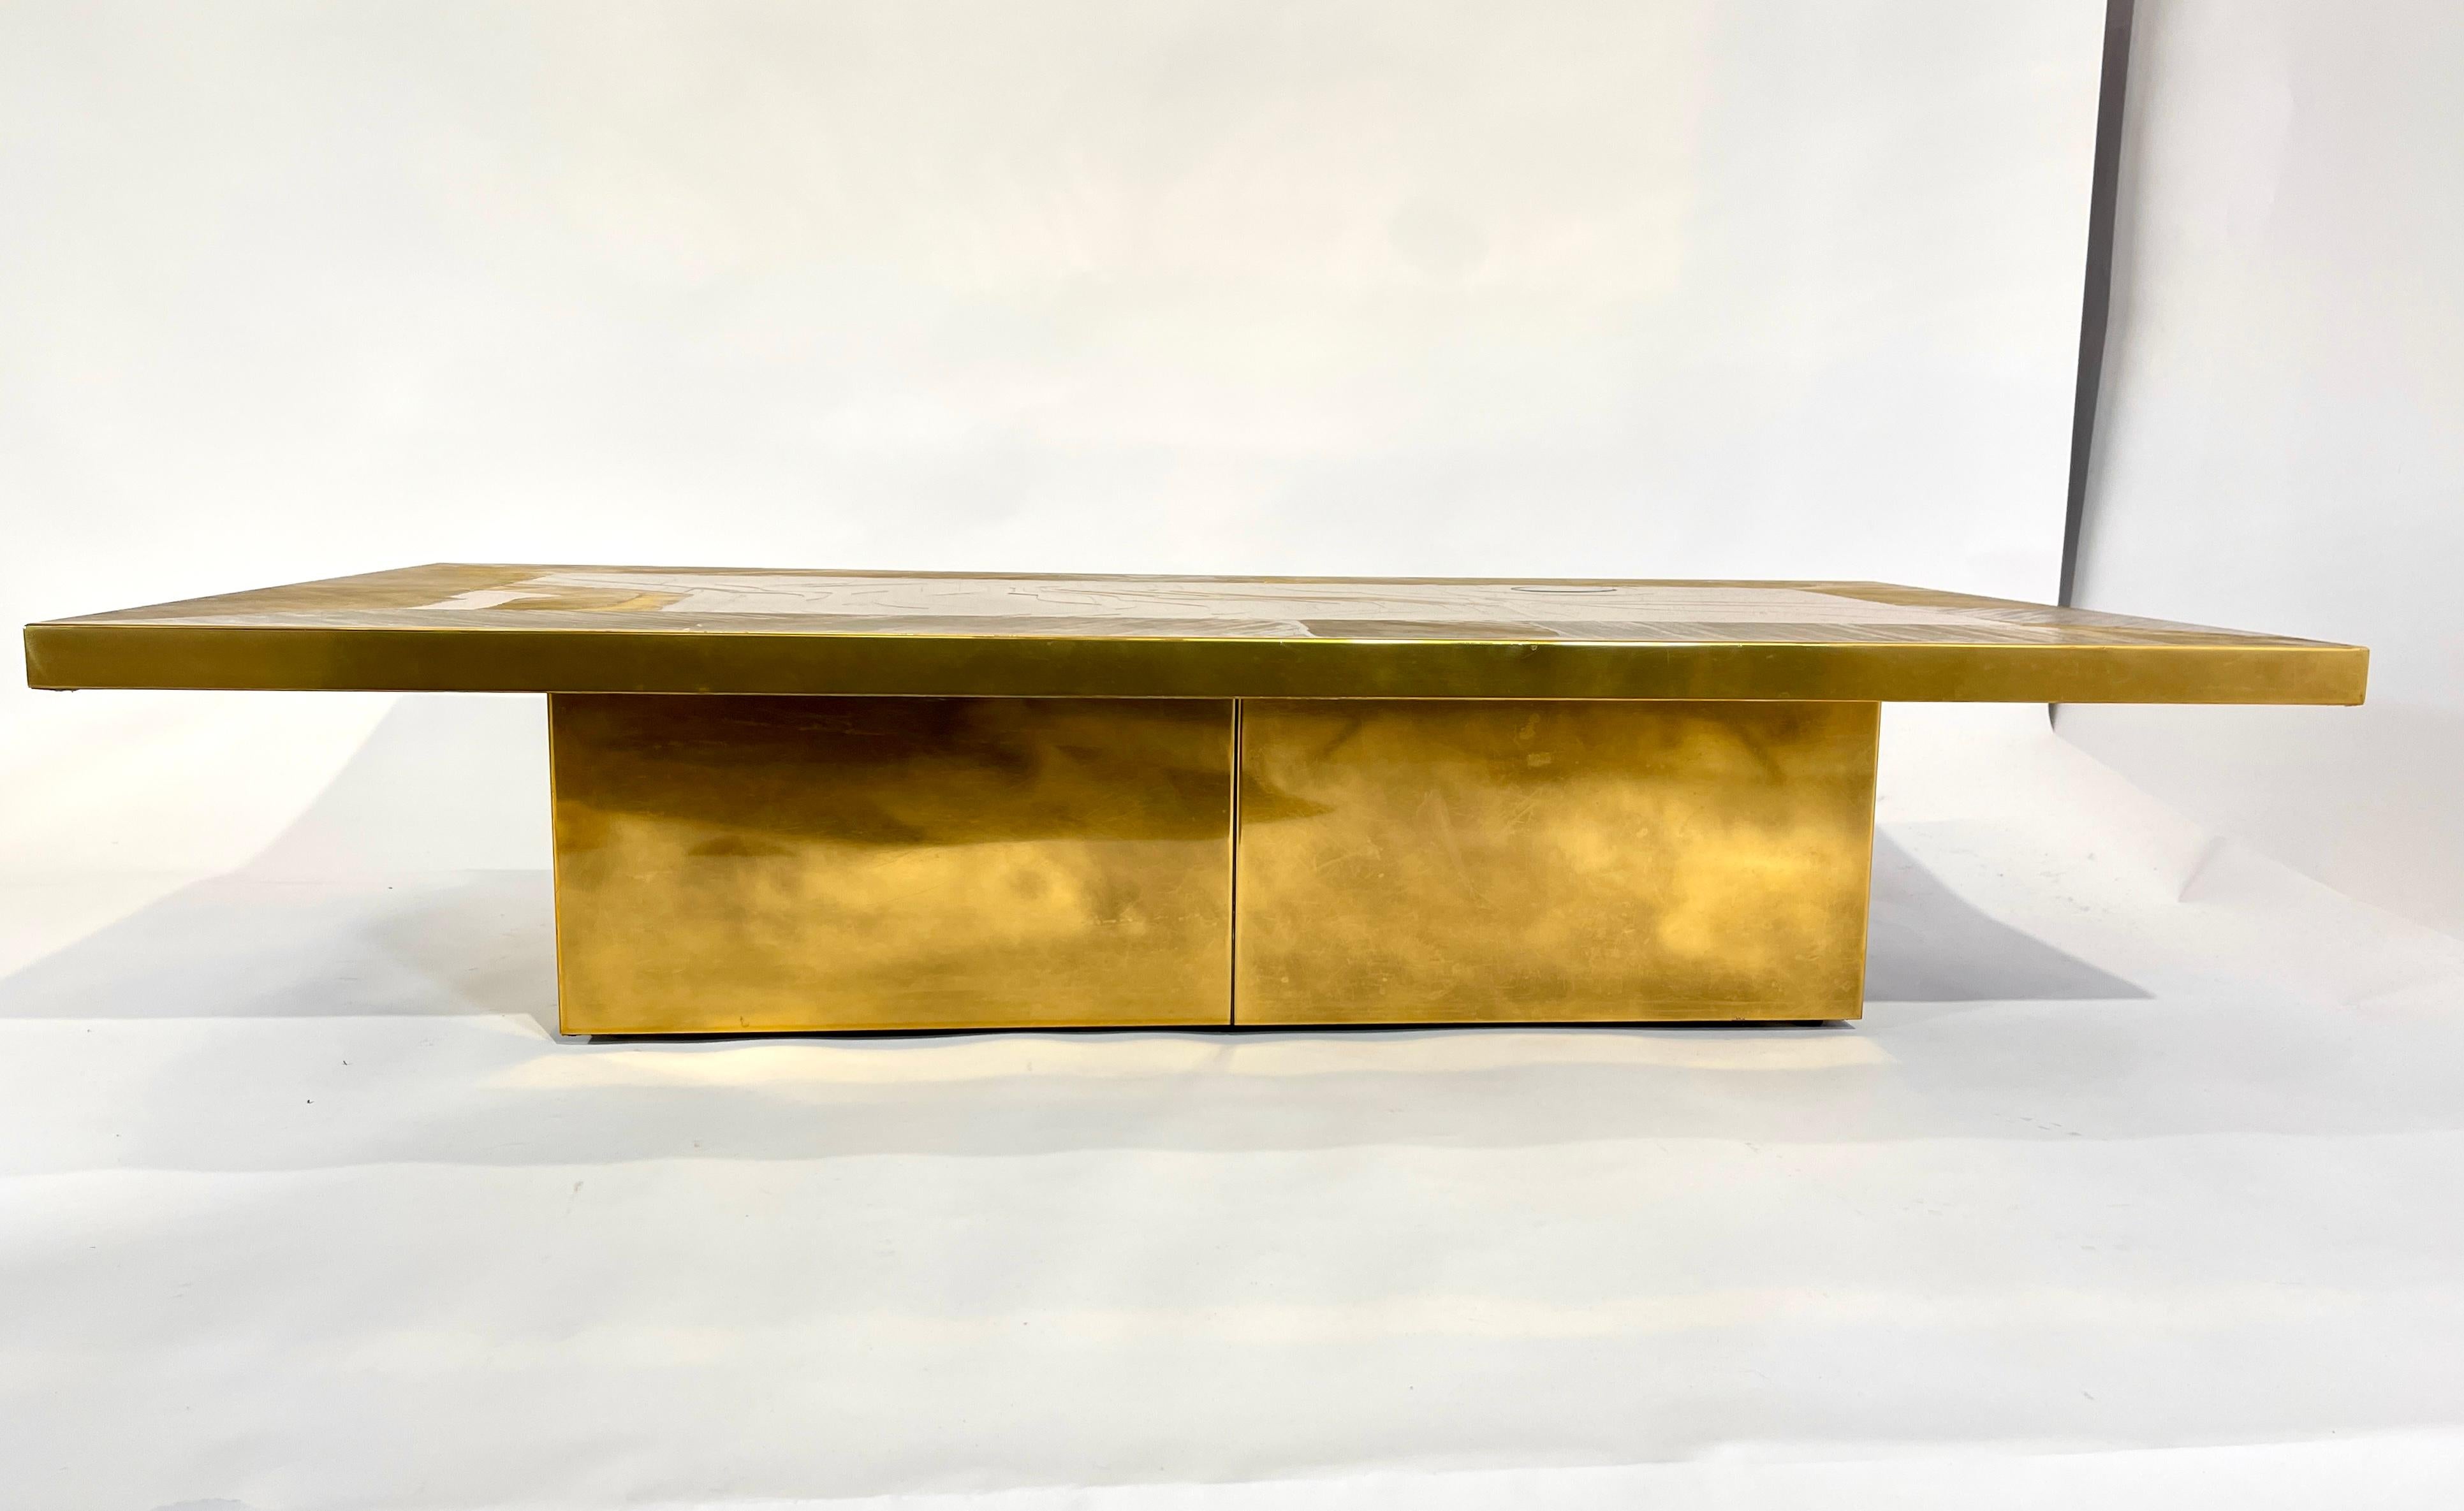 Engraved etched brass coffee table designed by Nadie Jenatzy in 1970, with 1 agate stone top. This furniture has a New refresh, new varnish and polish.
Signed by the Artist.
Nadie Jenatzi (1943-2004) is the wife of Armand Jonckers and the mother of